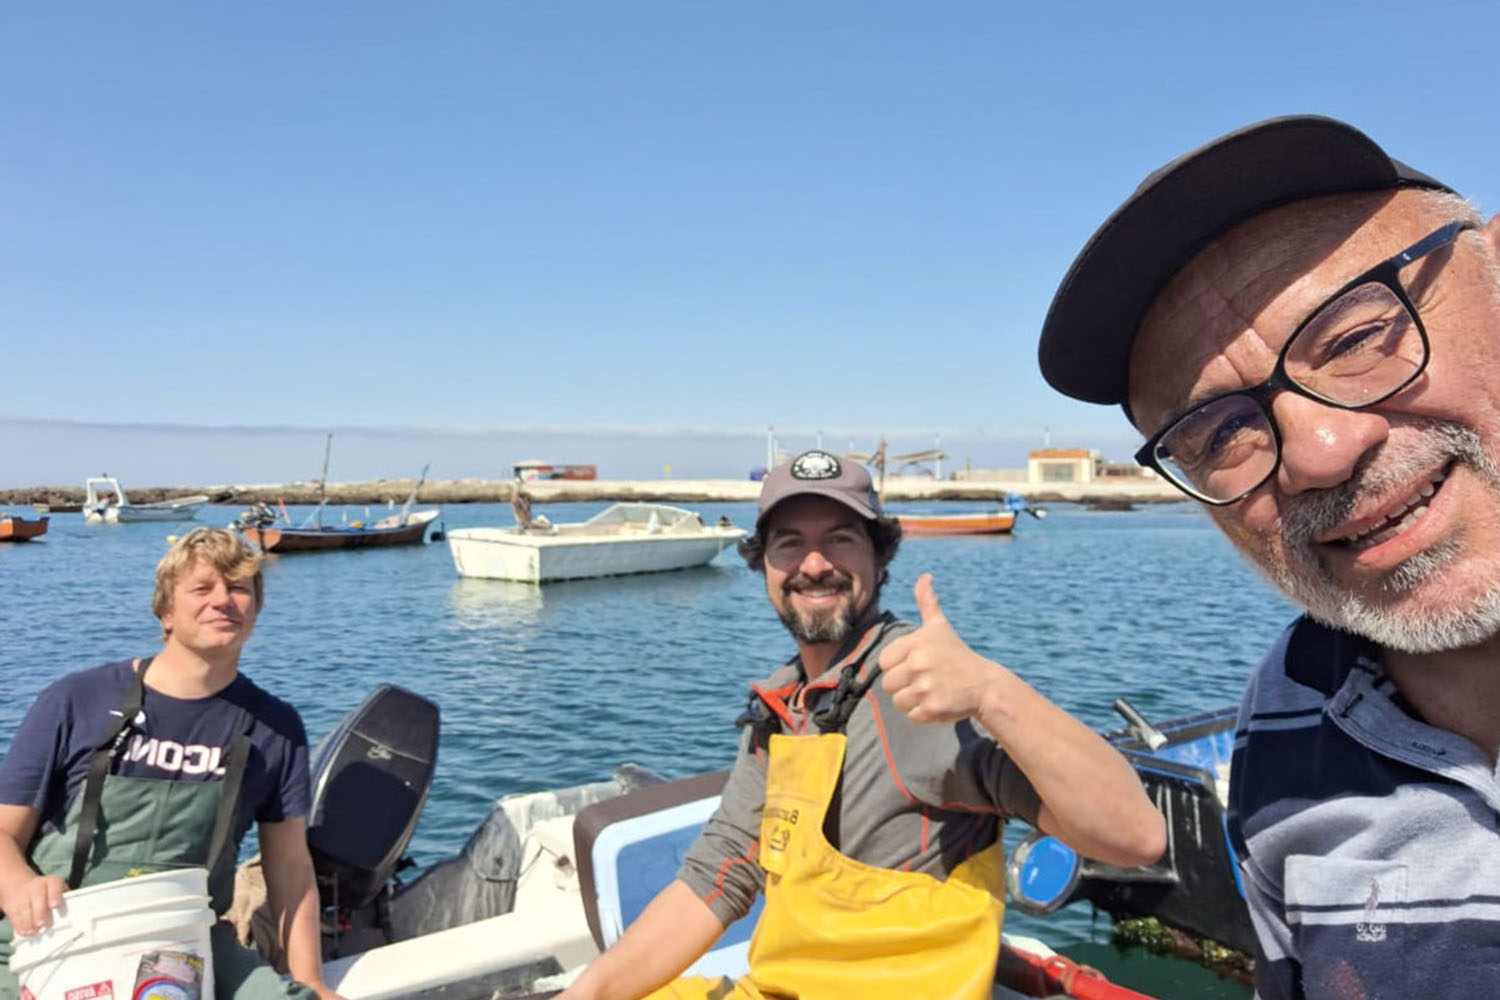 On 22 September 2023, researchers Miguel Araya (right), Mauricio Urbina, and Hannes Baumann go out gill net fishing themselves near Iquique/Chile